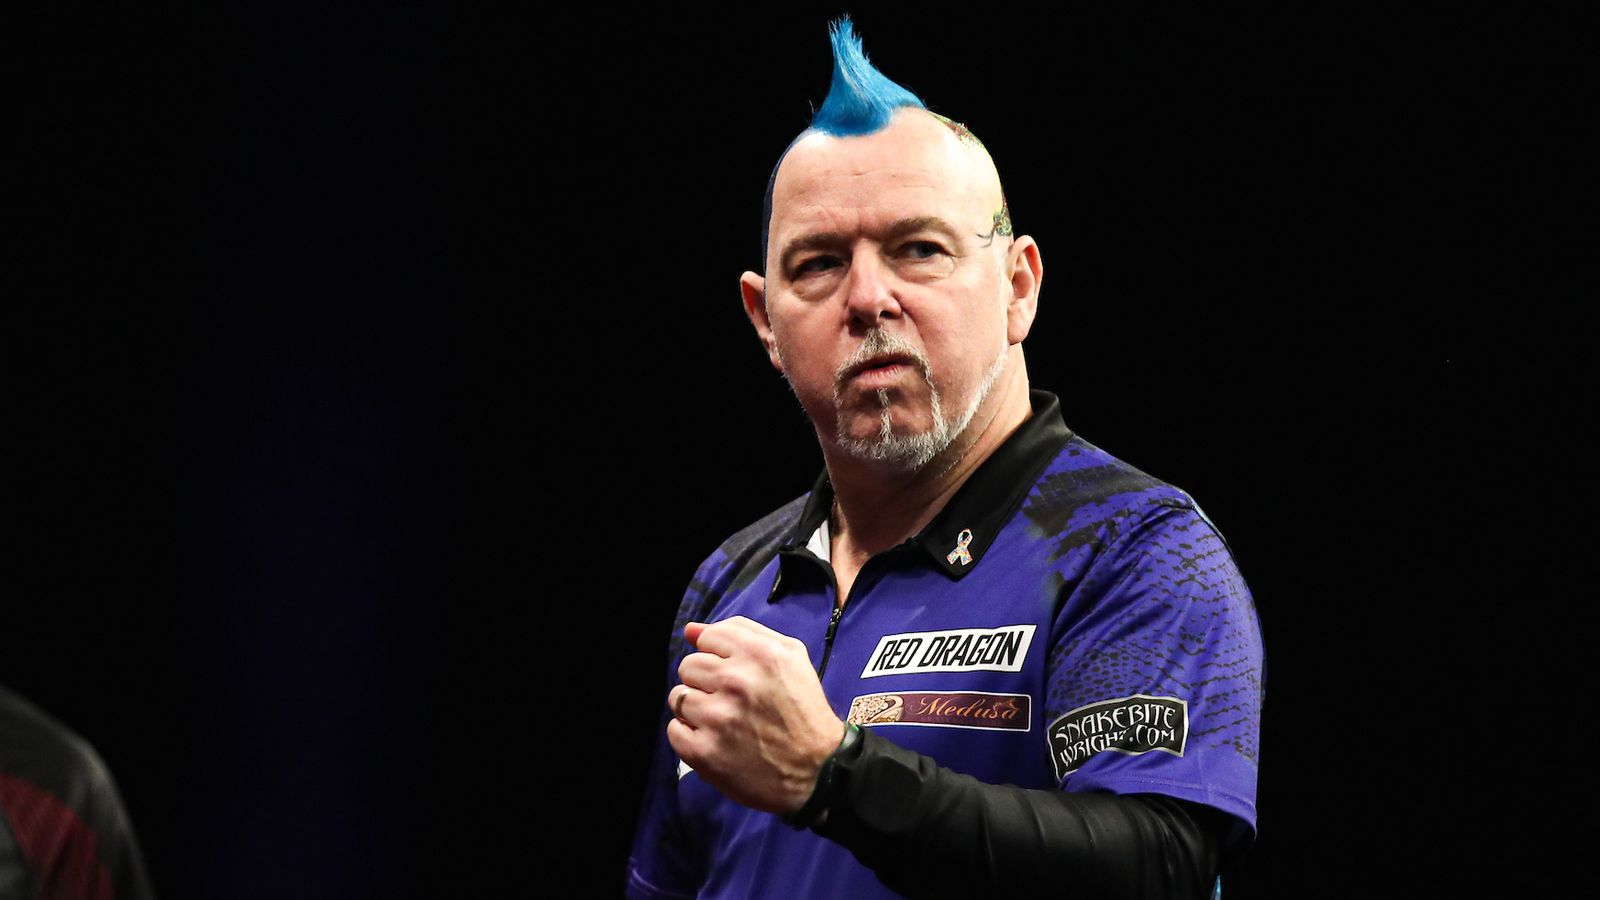 Premier League Darts schedule, results and TV times Michael Smith